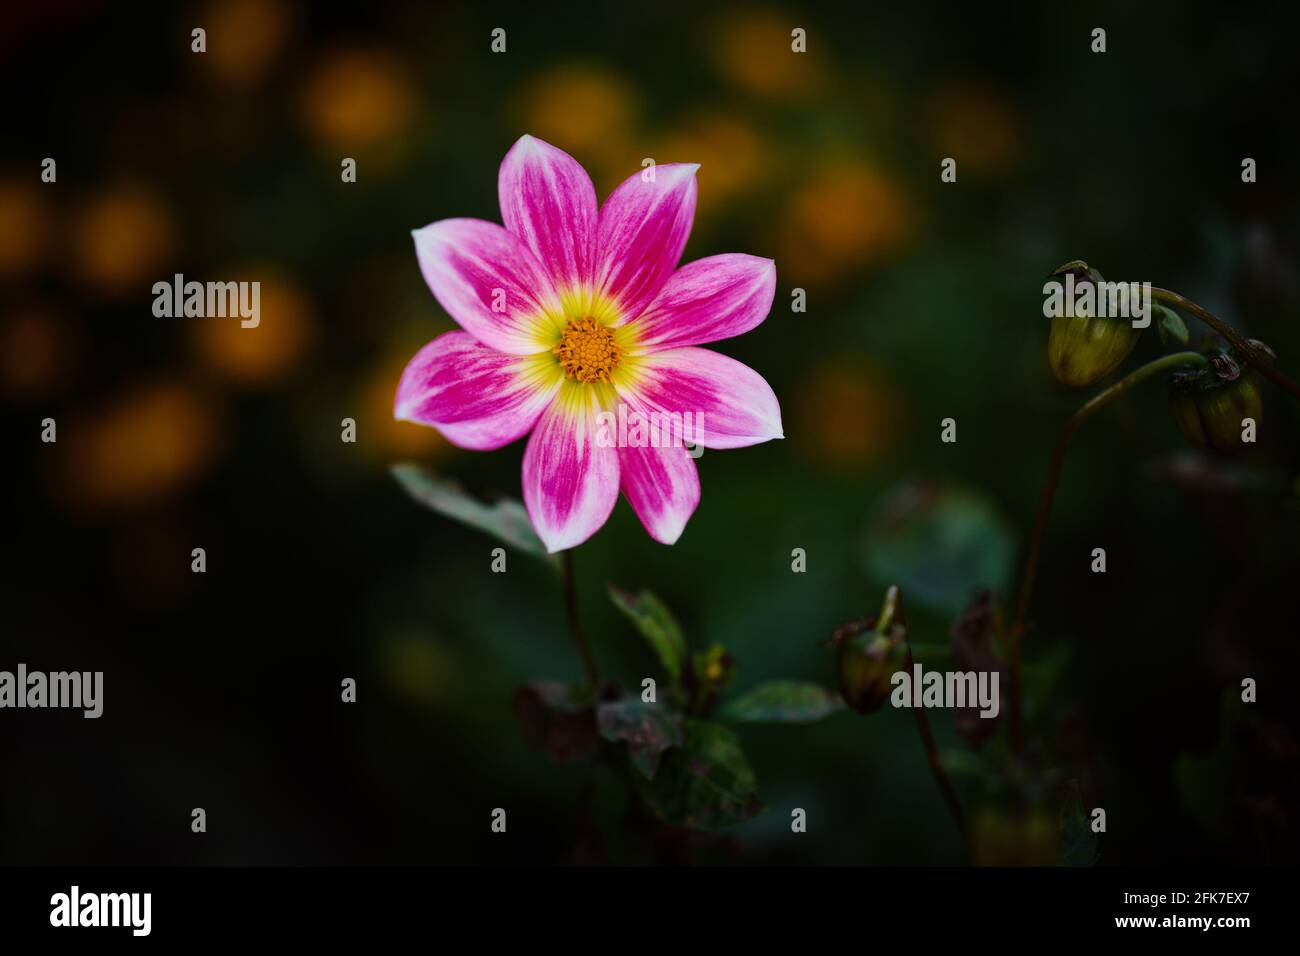 Flower of Dahlia. Selective focus with shallow depth of field. Stock Photo